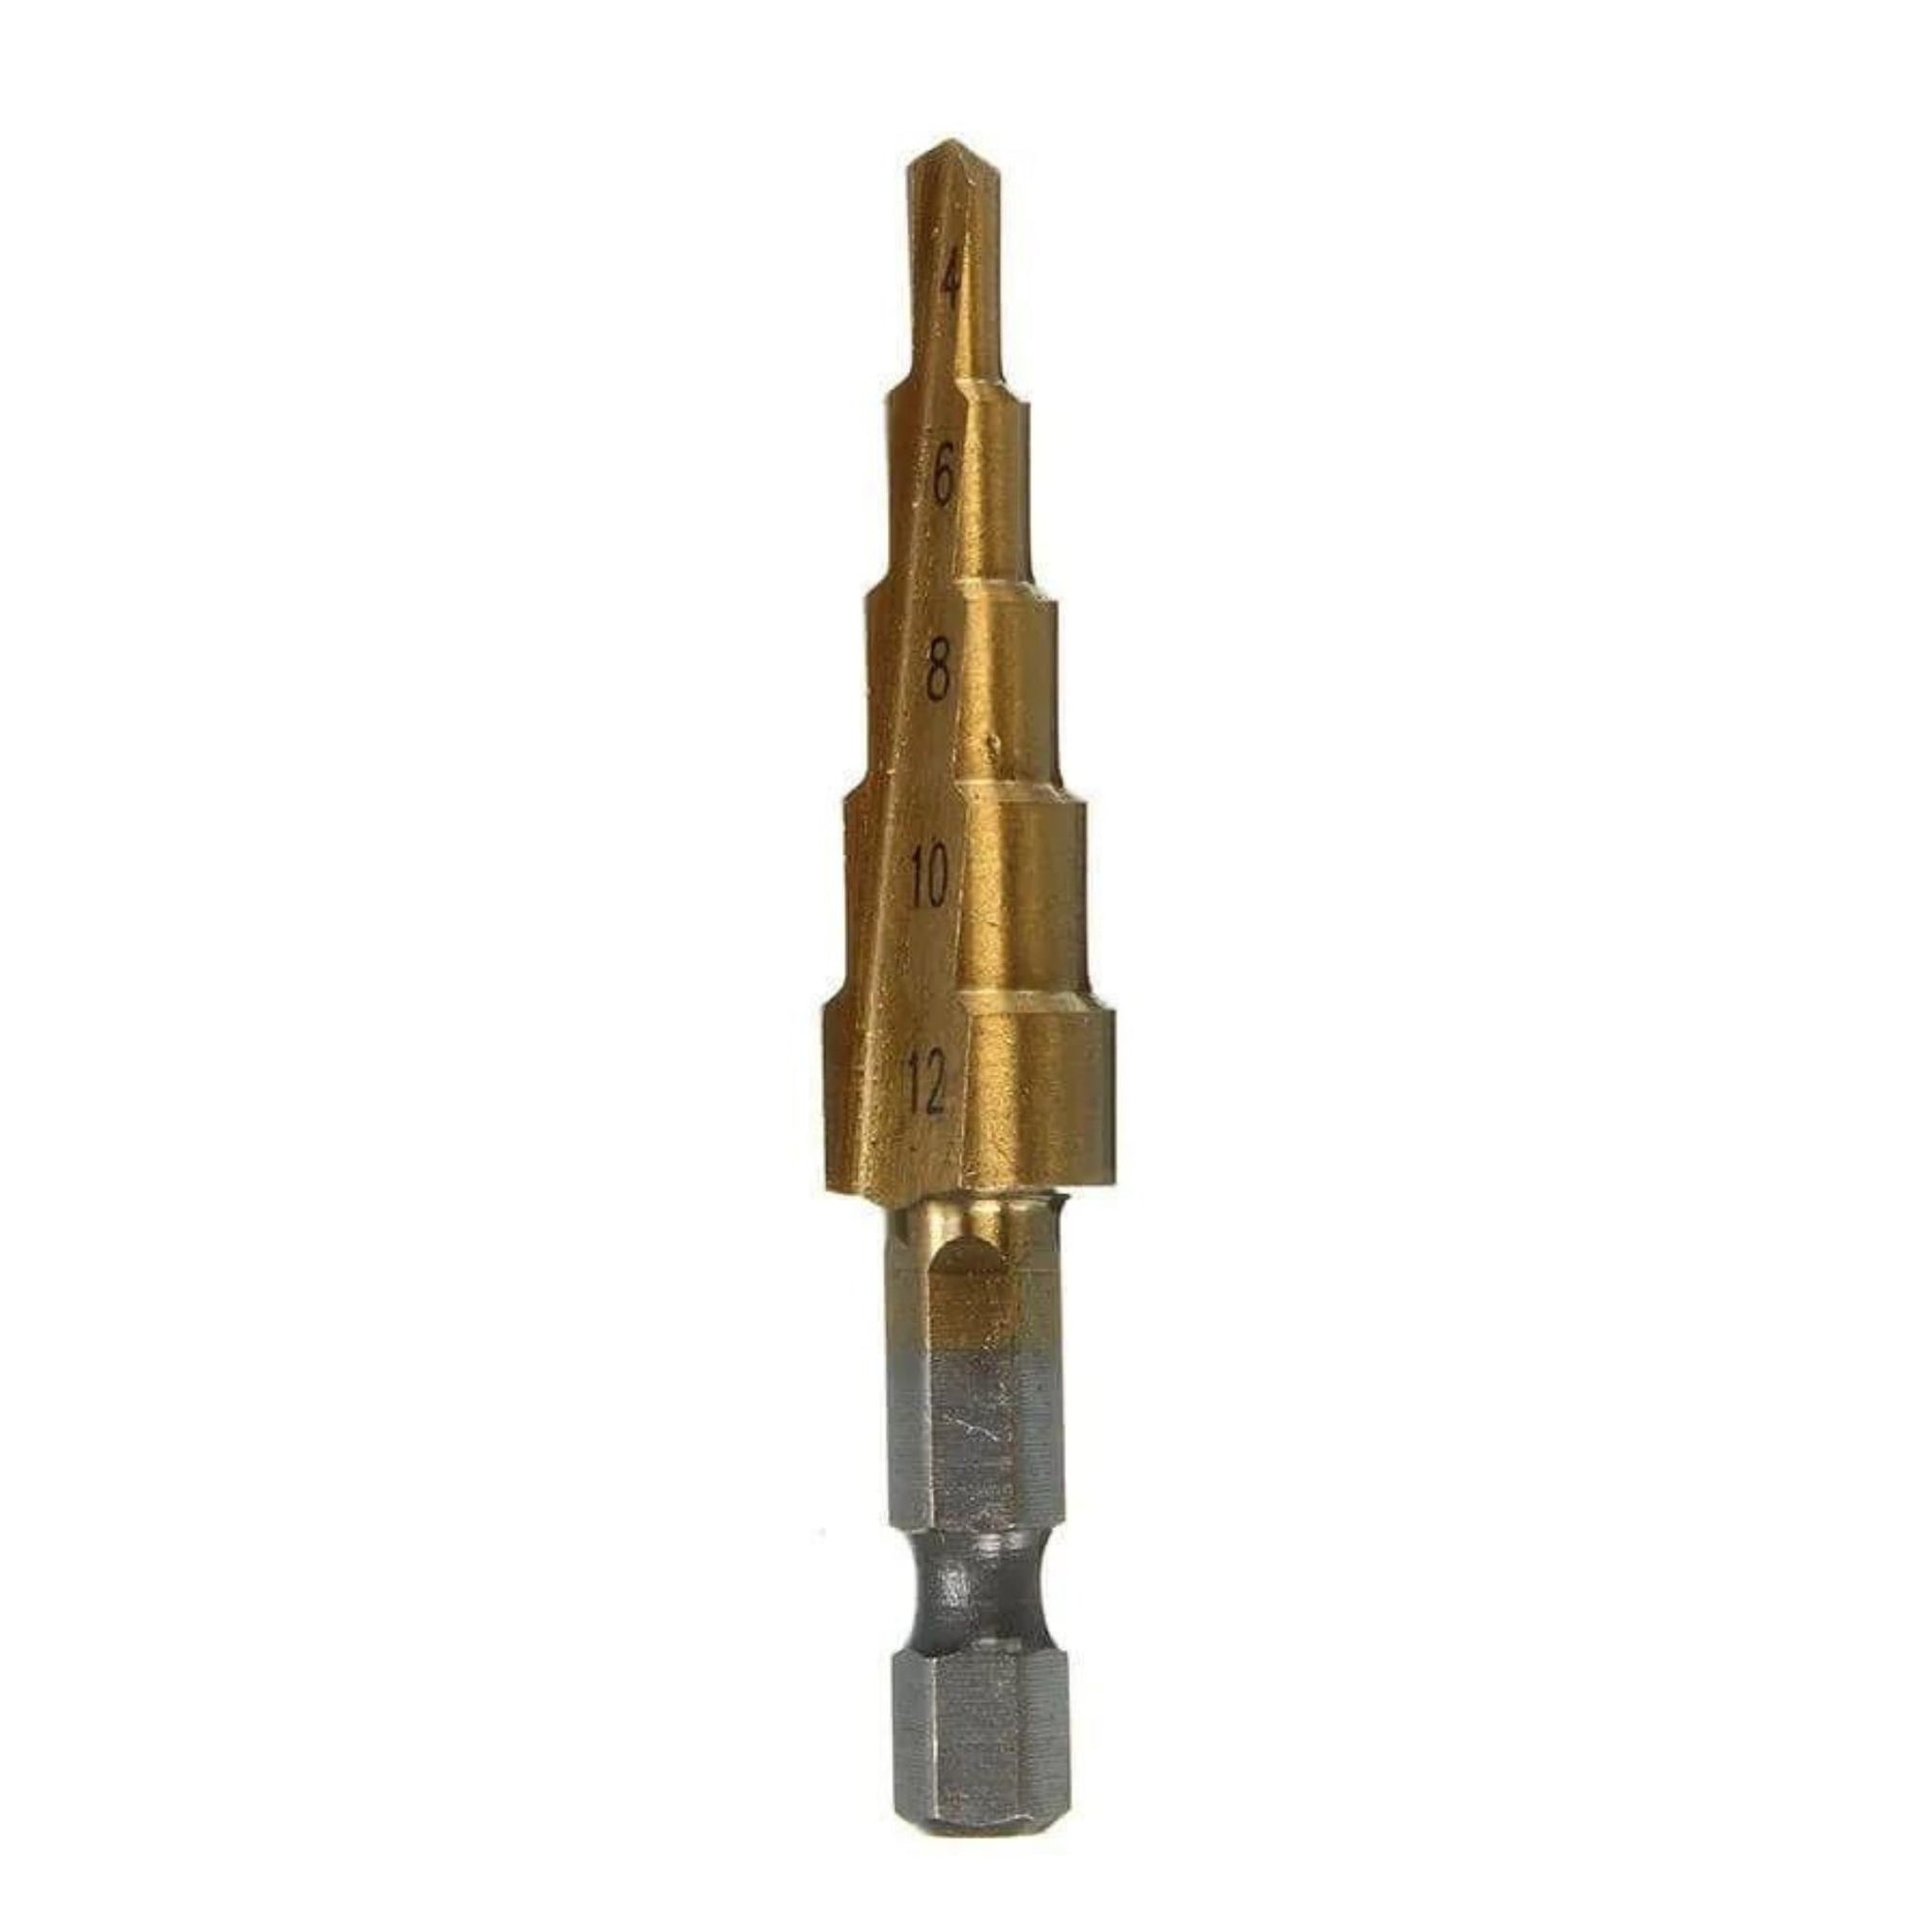 HSS Step Drill Bit 4mm - 12mm - South East Clearance Centre